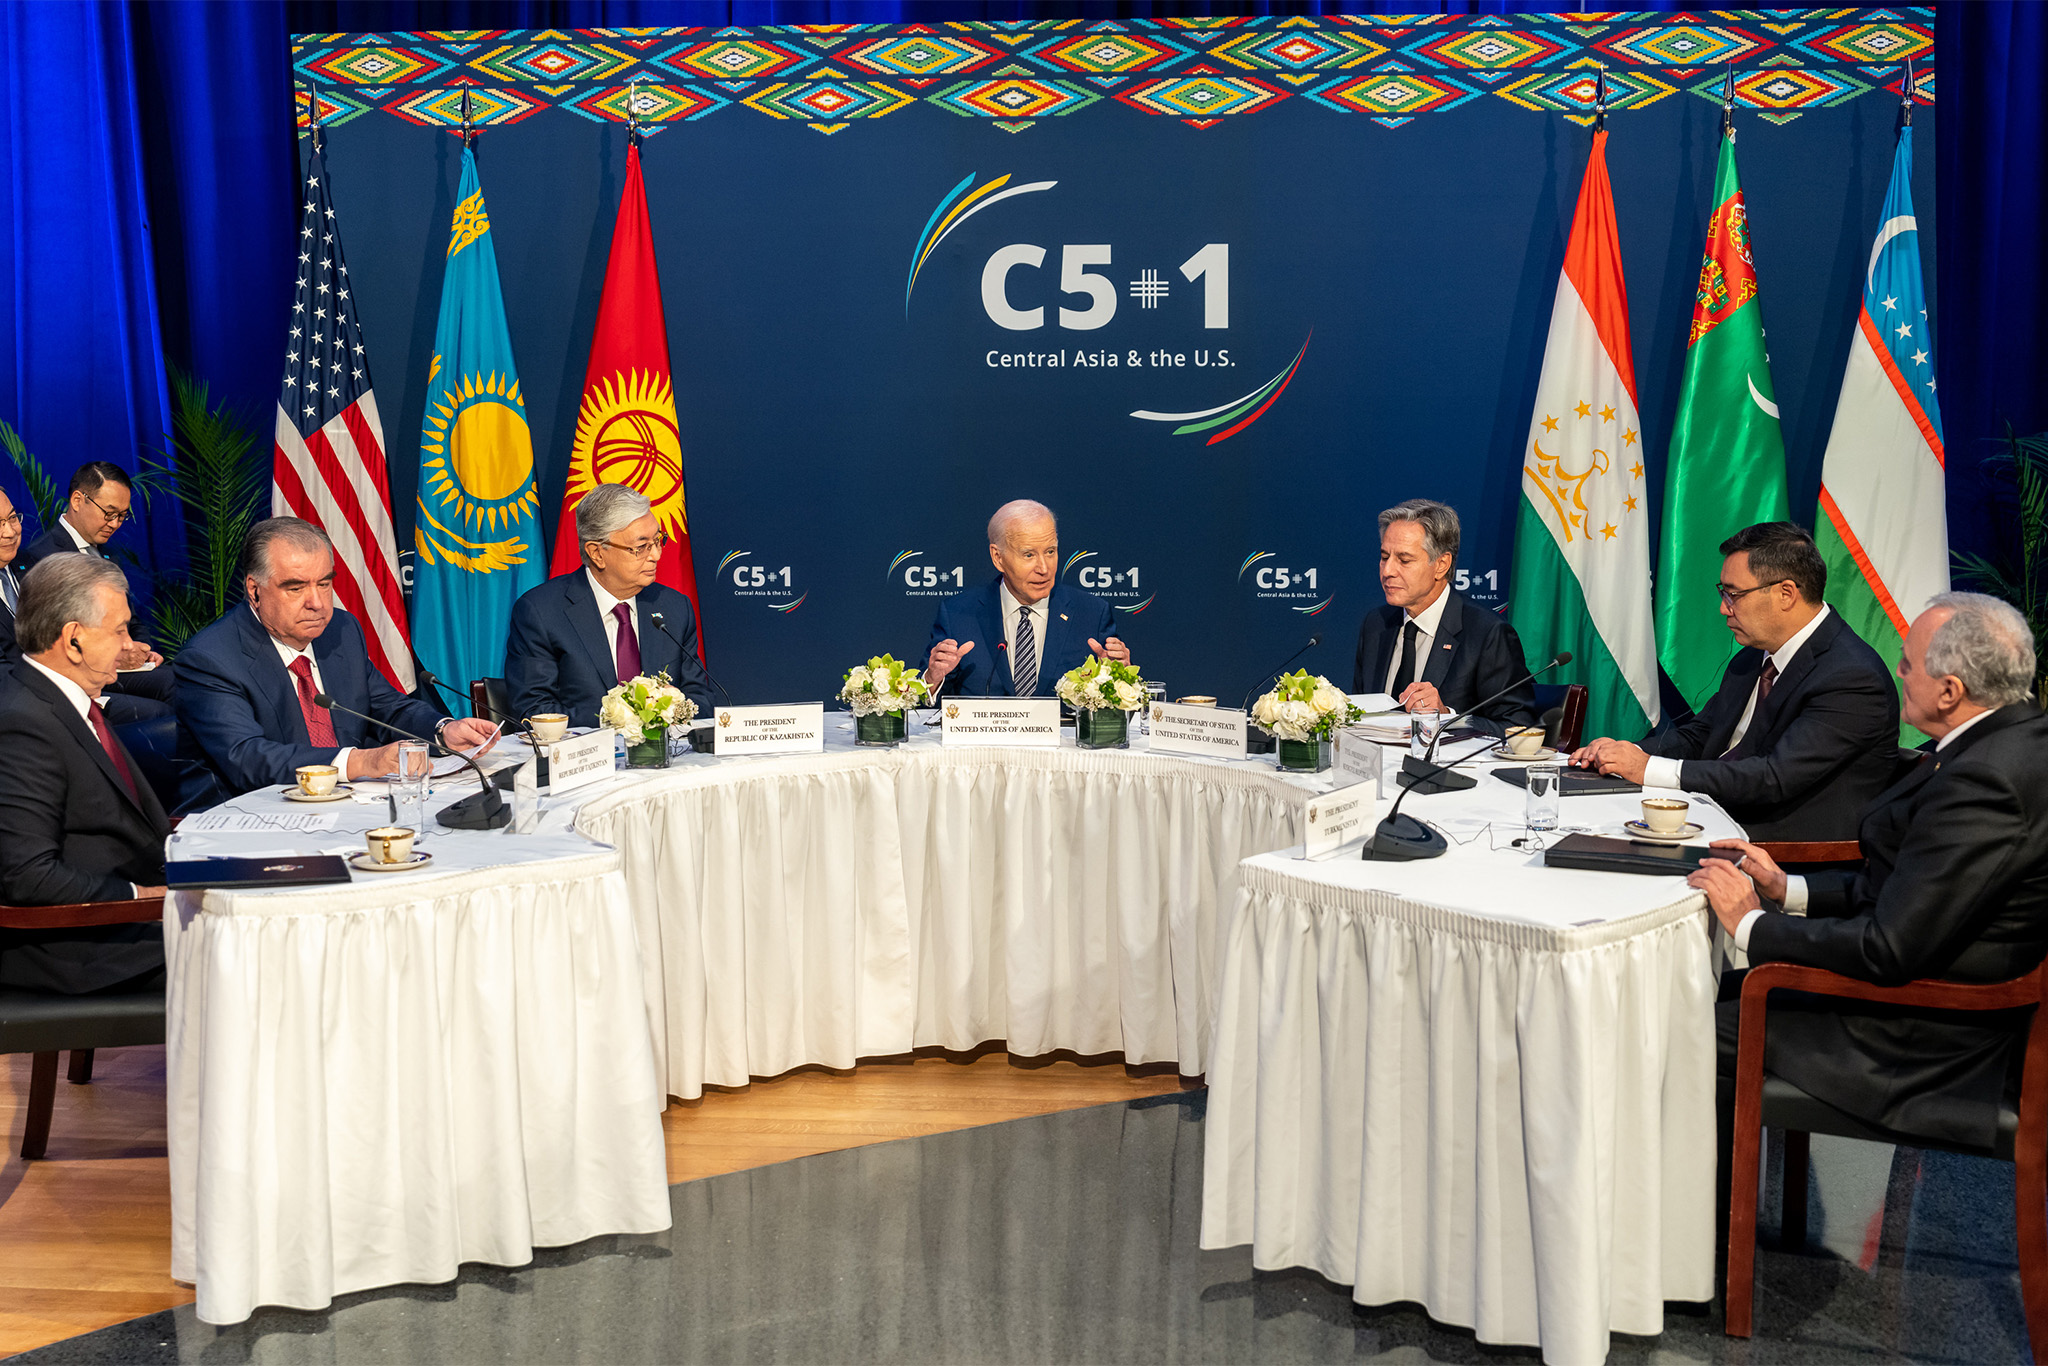 President Joe Biden hosts a meeting with central Asian presidents for the Central Asia 5+1 Summit, Tuesday, September 19, 2023, at the U.S. Mission to the United Nations in New York City. (Official White House Photo by Adam Schultz)